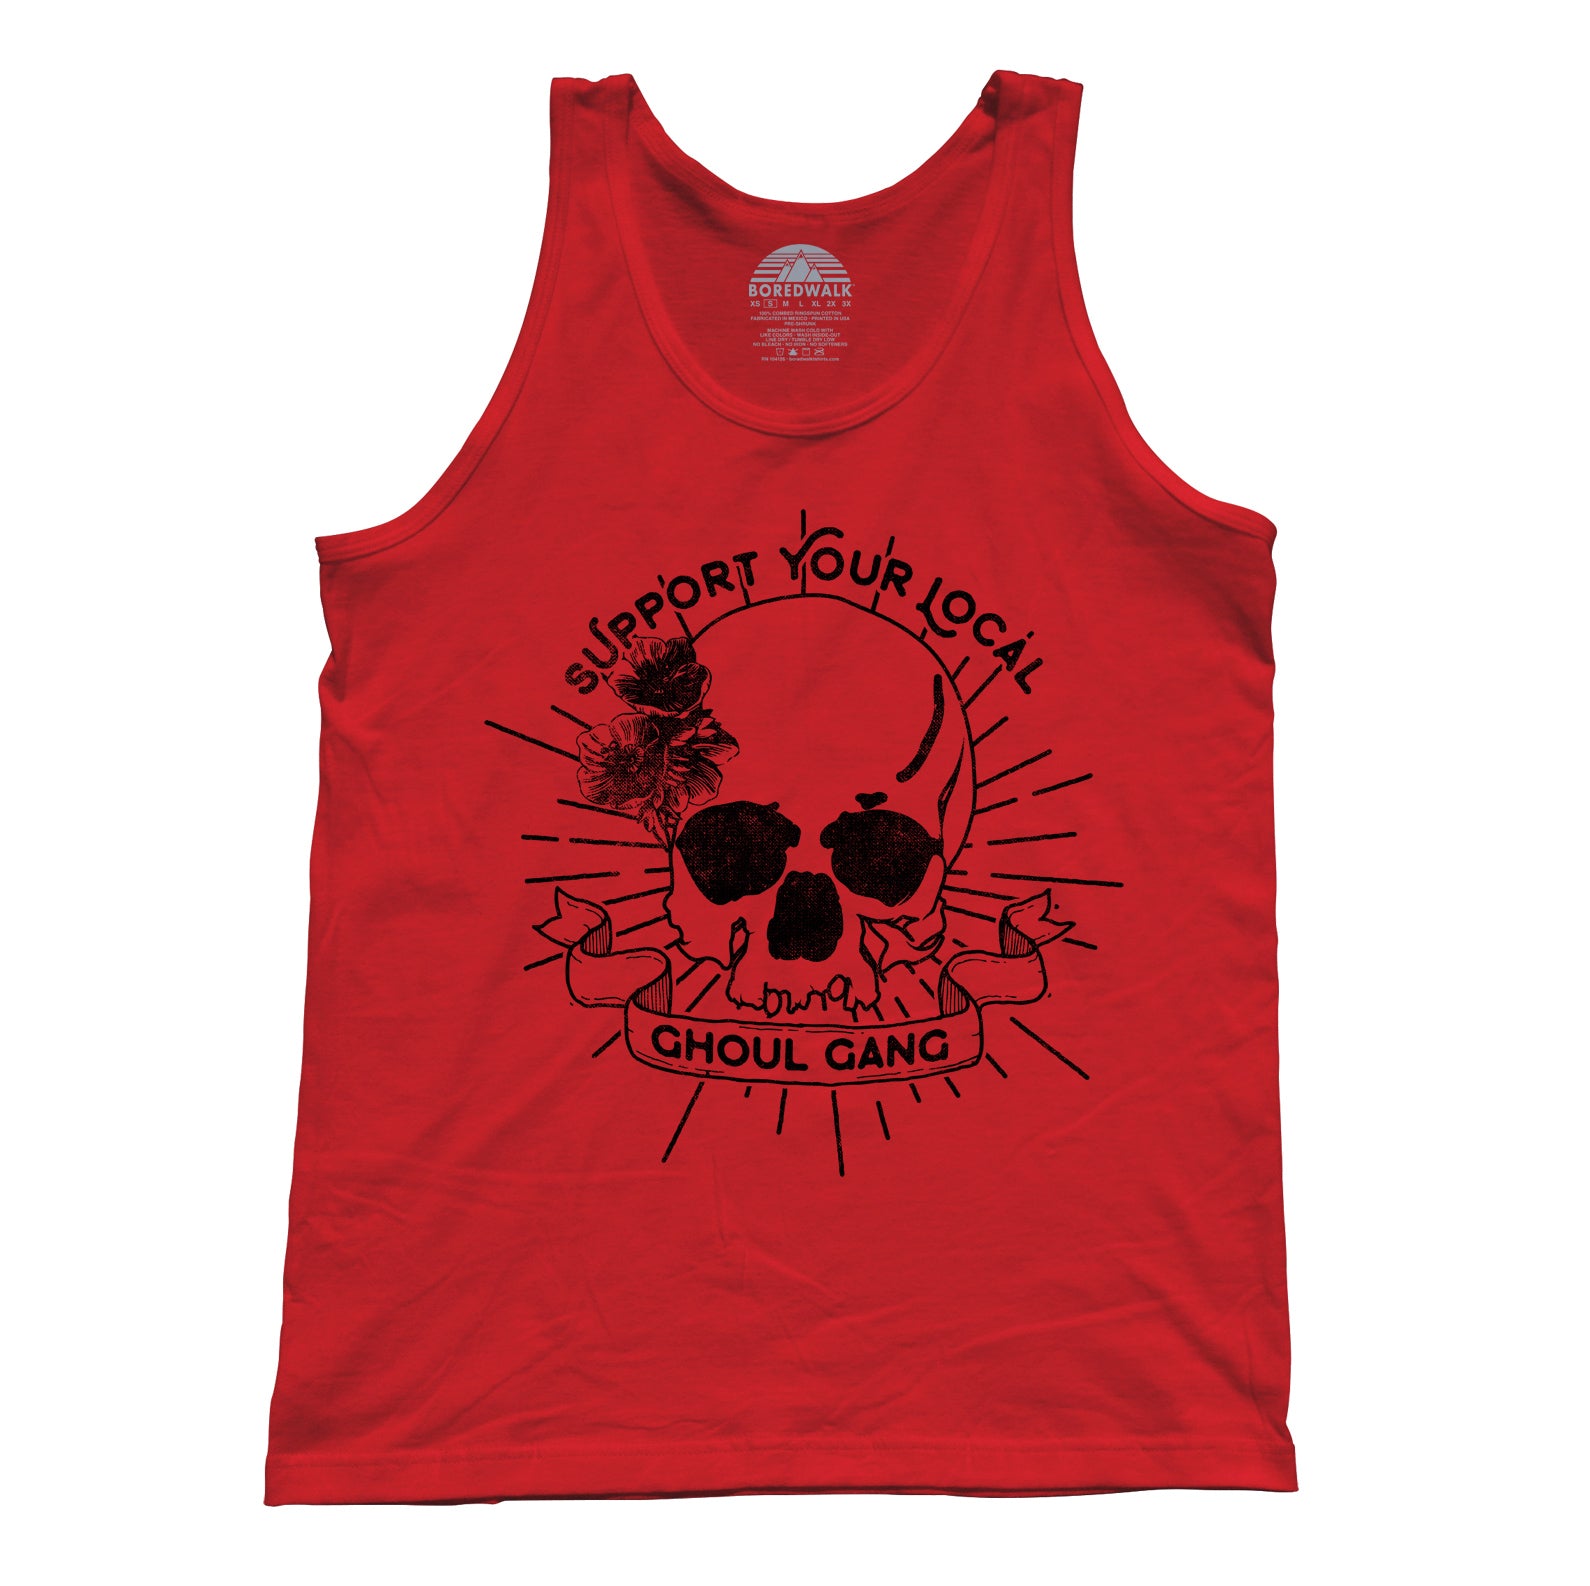 Unisex Support Your Local Ghoul Gang Tank Top